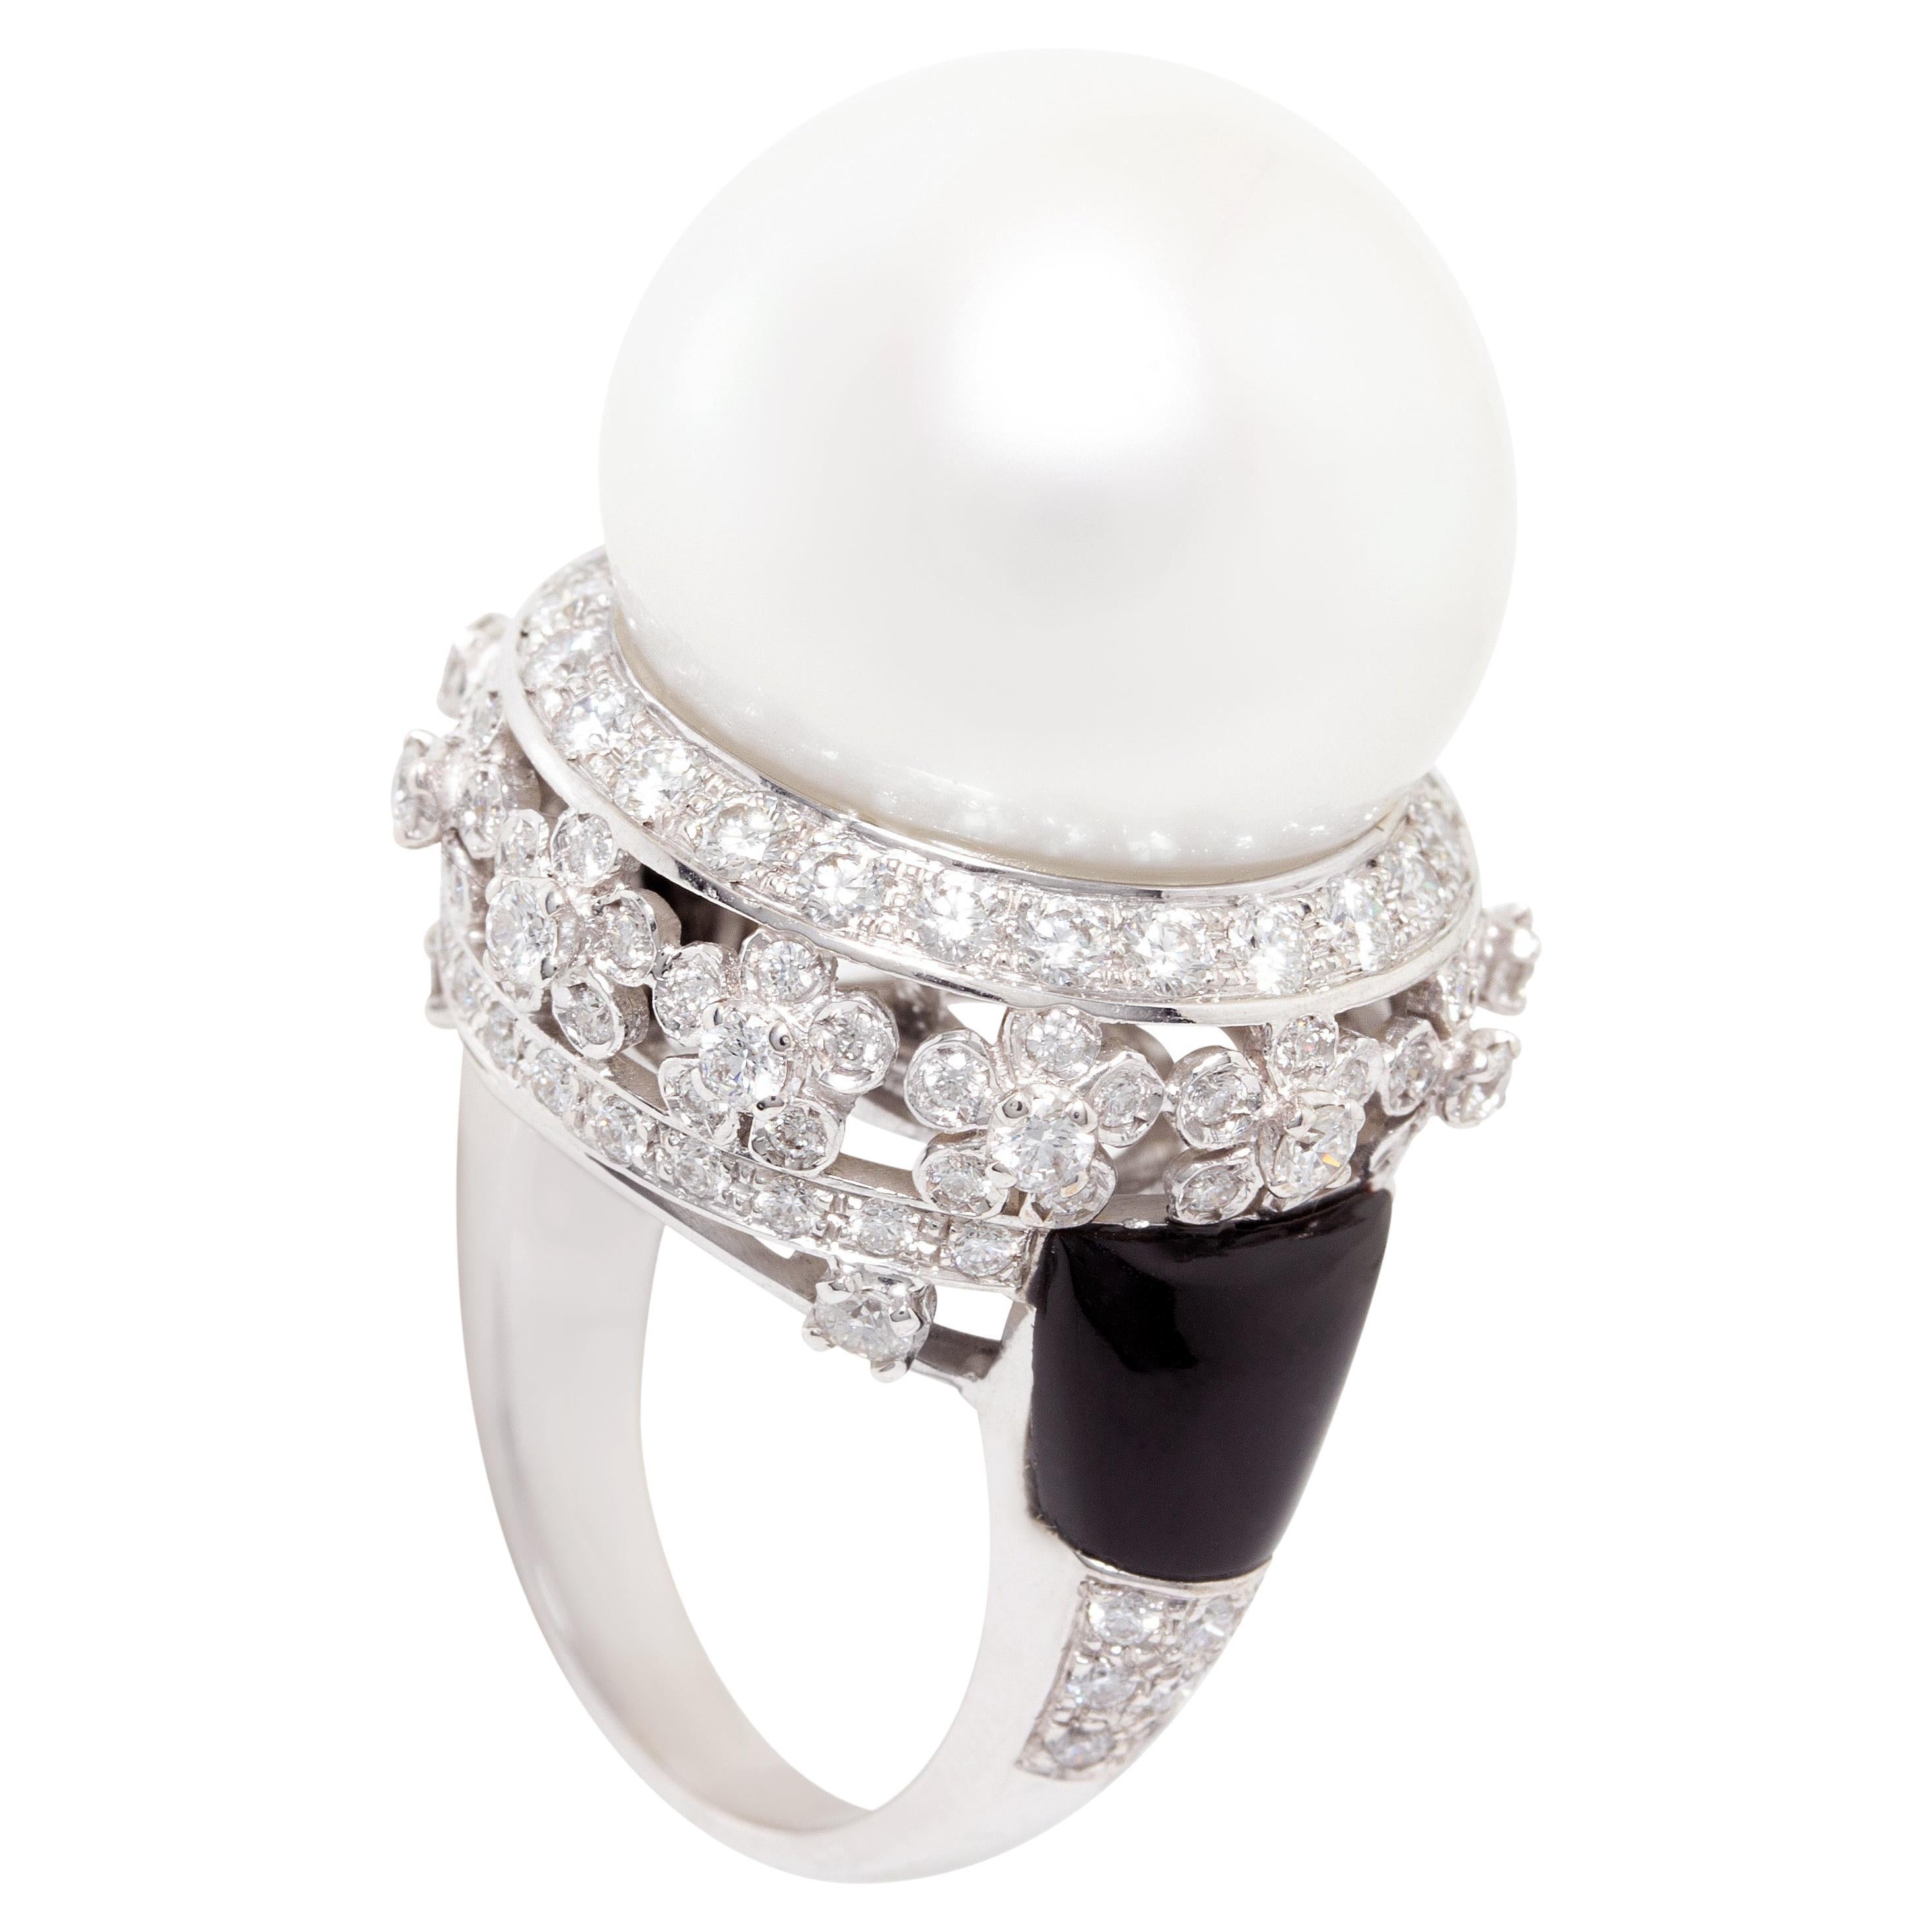 Ella Gafter Art Déco style 19mm South Sea Pearl Diamond Ring 